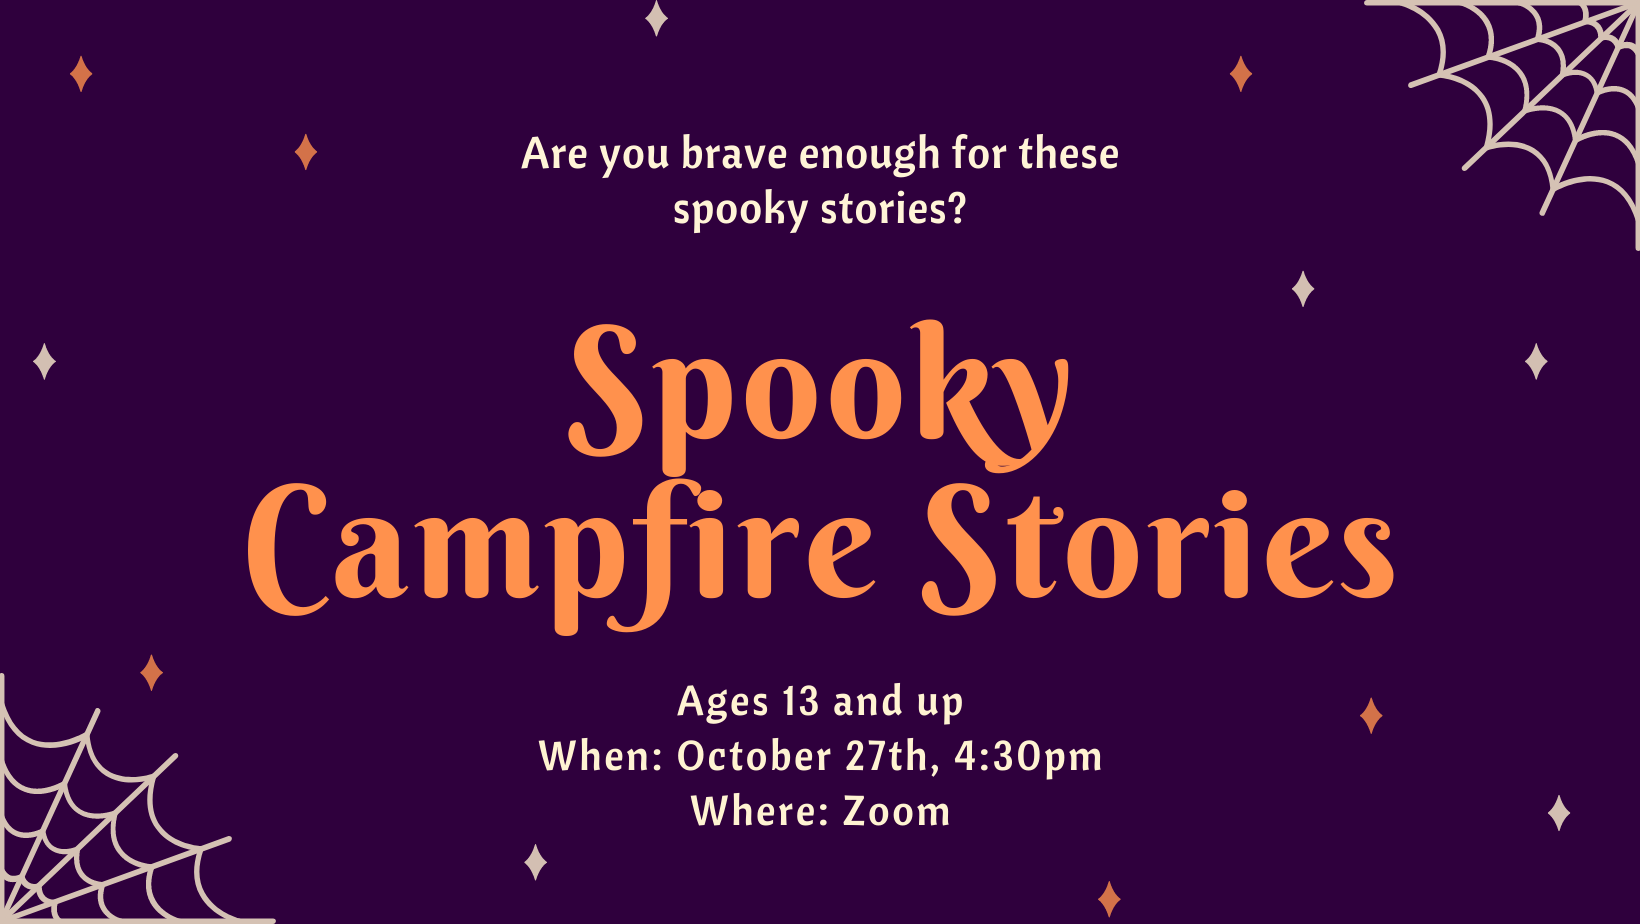 Are you brave enough for these spooky stories? Spooky Campfire Stories, Ages 13 and up, October 27th at 4:30pm, on Zoom